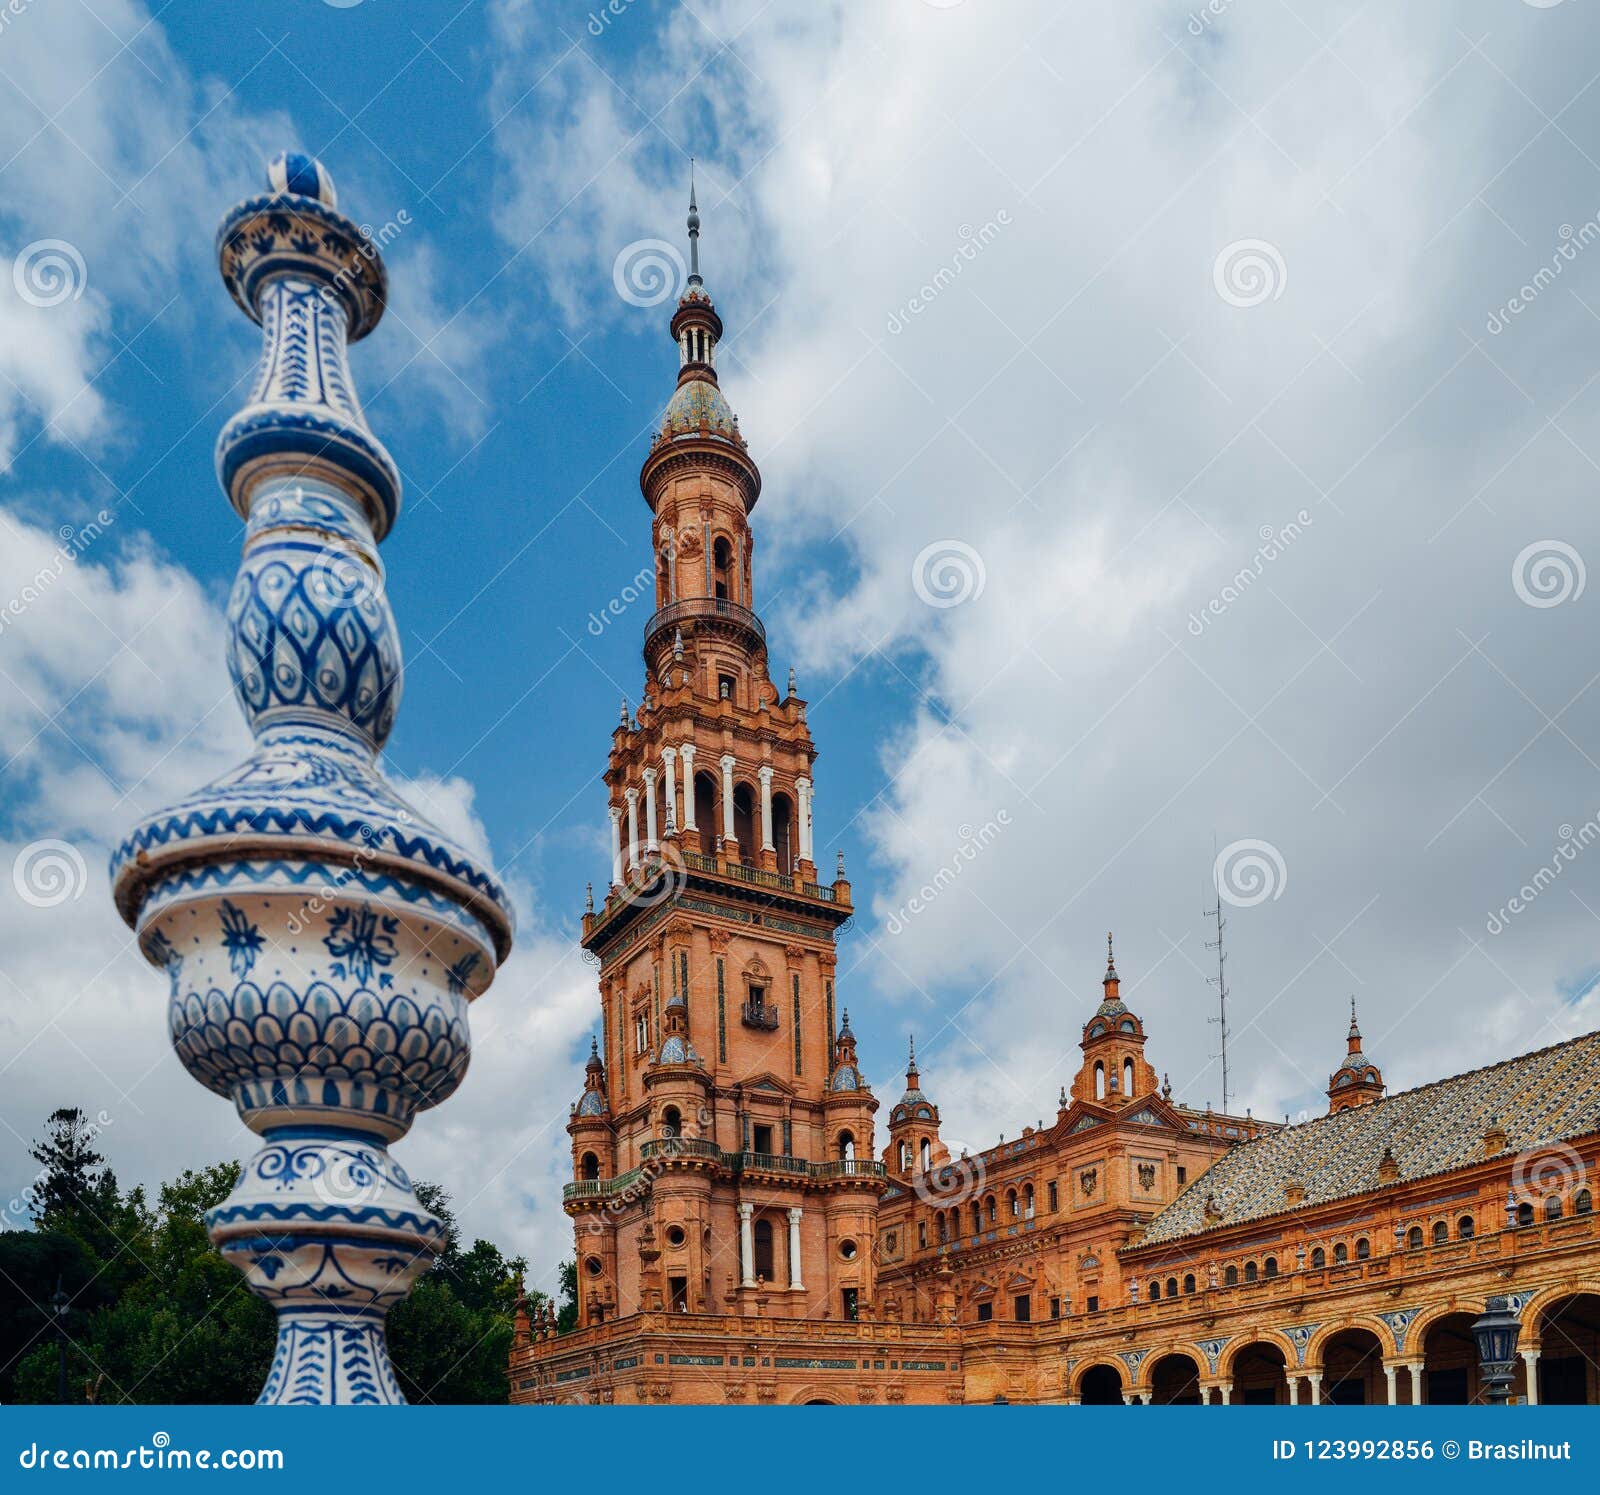 juxtaposition of blue and white ceramic azulejo tiles against one of the baroque sandstone tower at plaza de espana in seville, sp